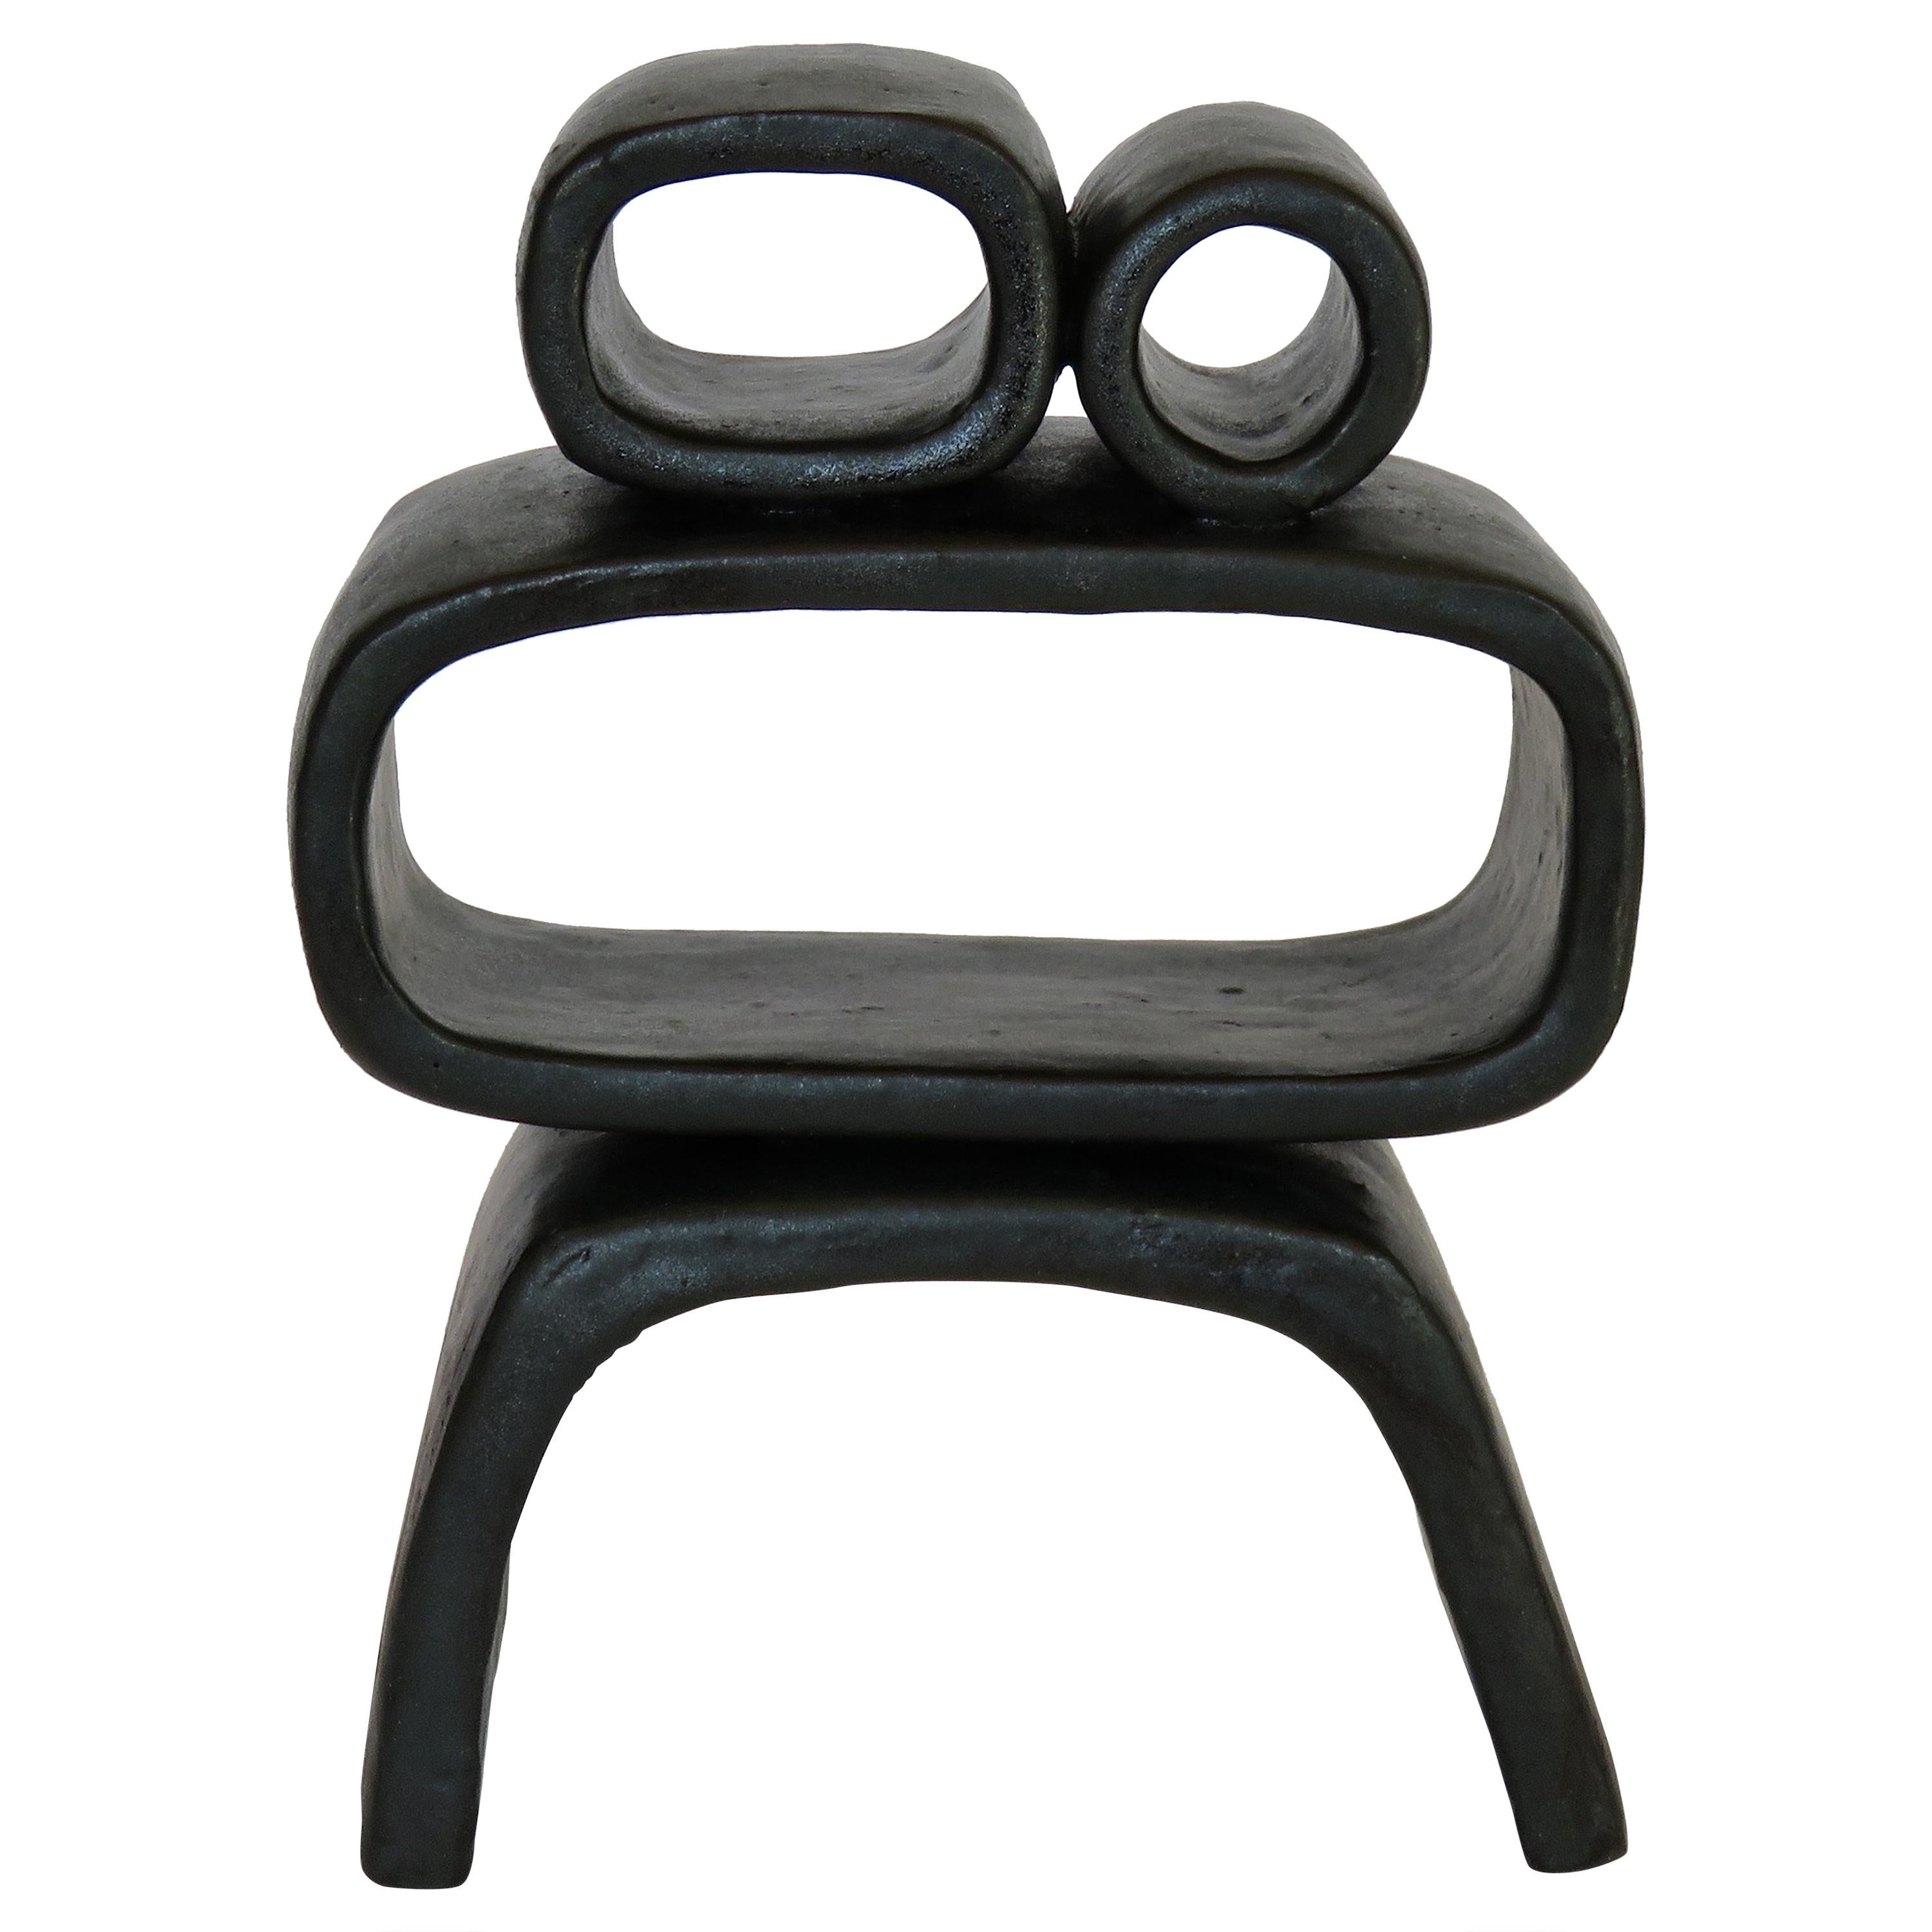 "One Eye" Metallic Black Hand-Built Ceramic Sculpture with Hollow Rings on Legs